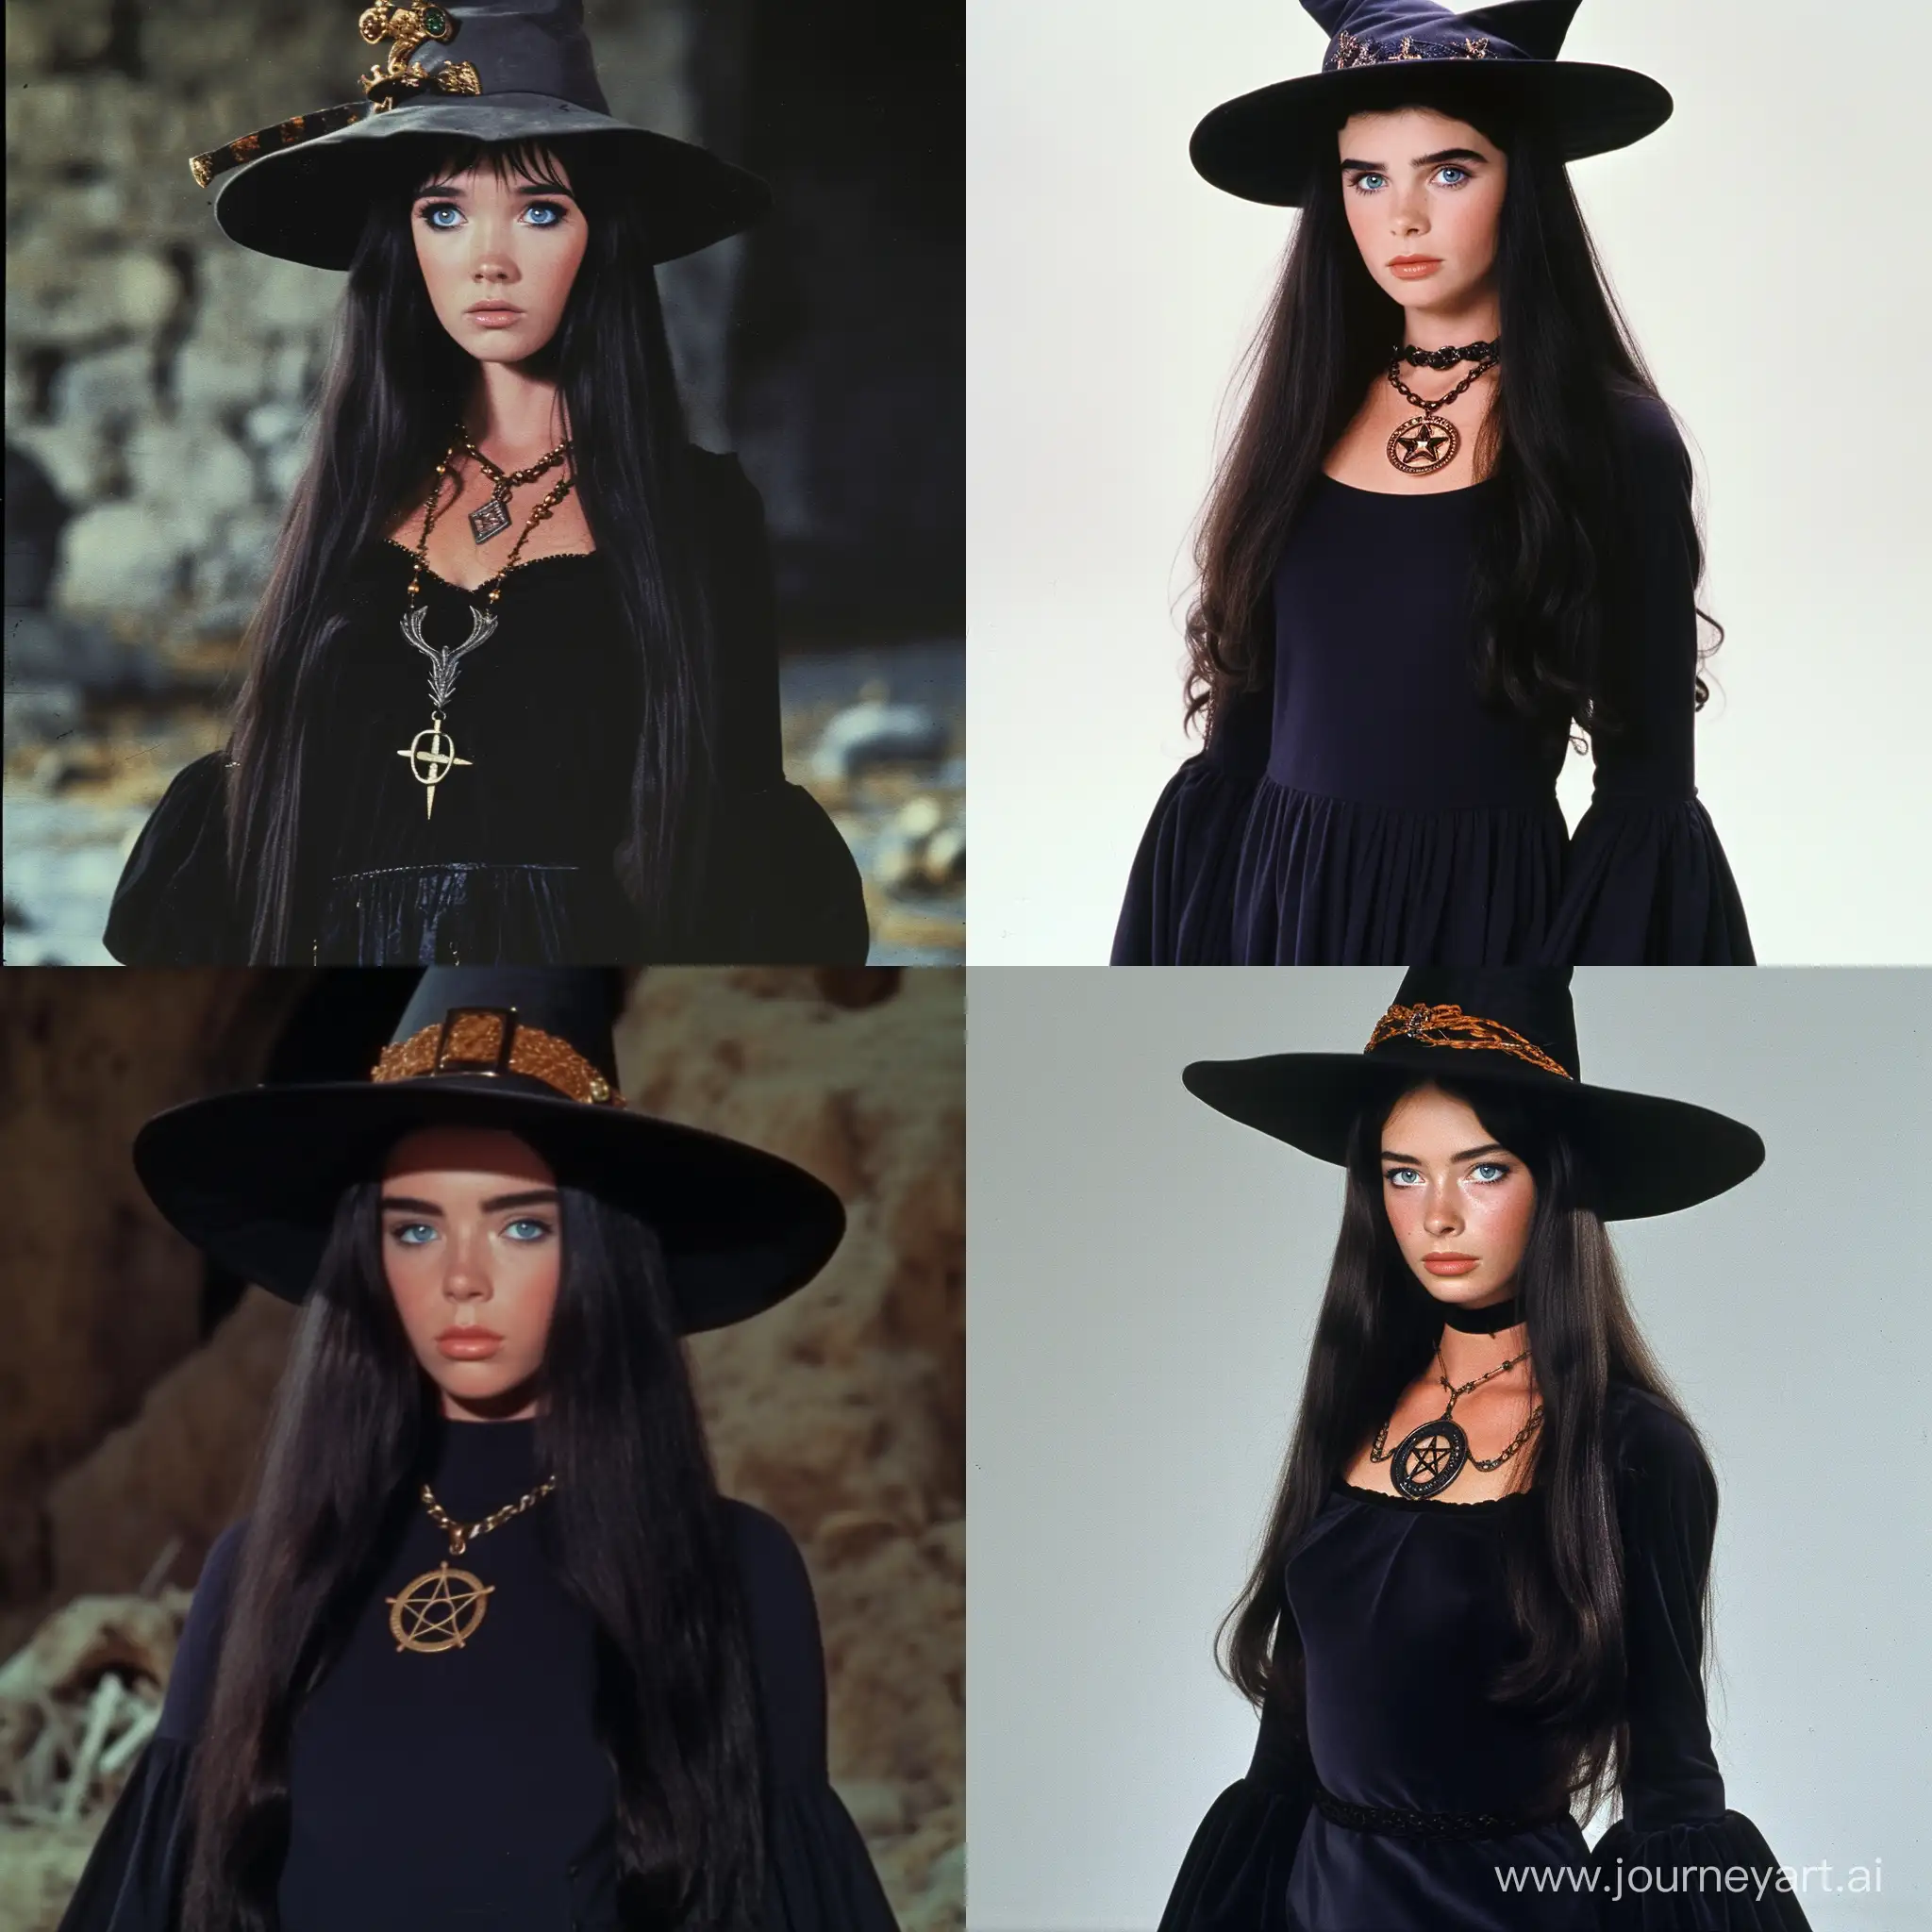 a young woman with long black hair blue eyes thick eyebrow wearing a long black wide-sleeved dress with a witch's hat and a pentagram necklace "screenshot from excalibur 1981"